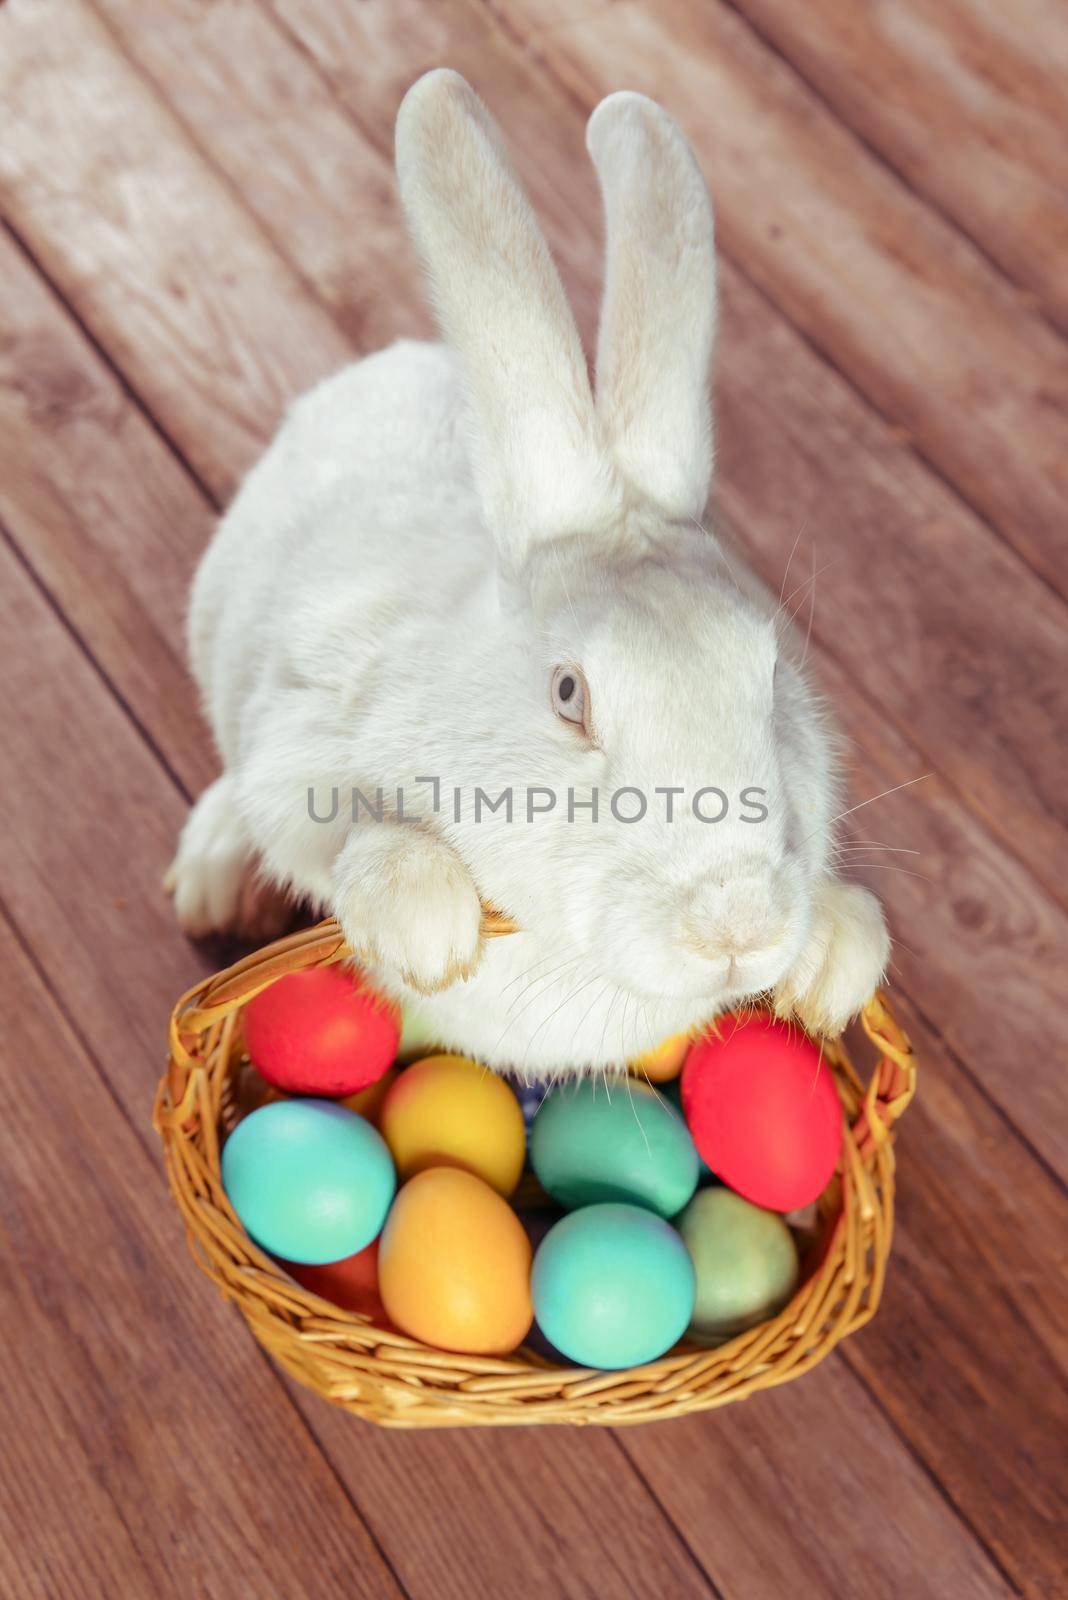 White Easter rabbit sits with basket of colored eggs on wooden table